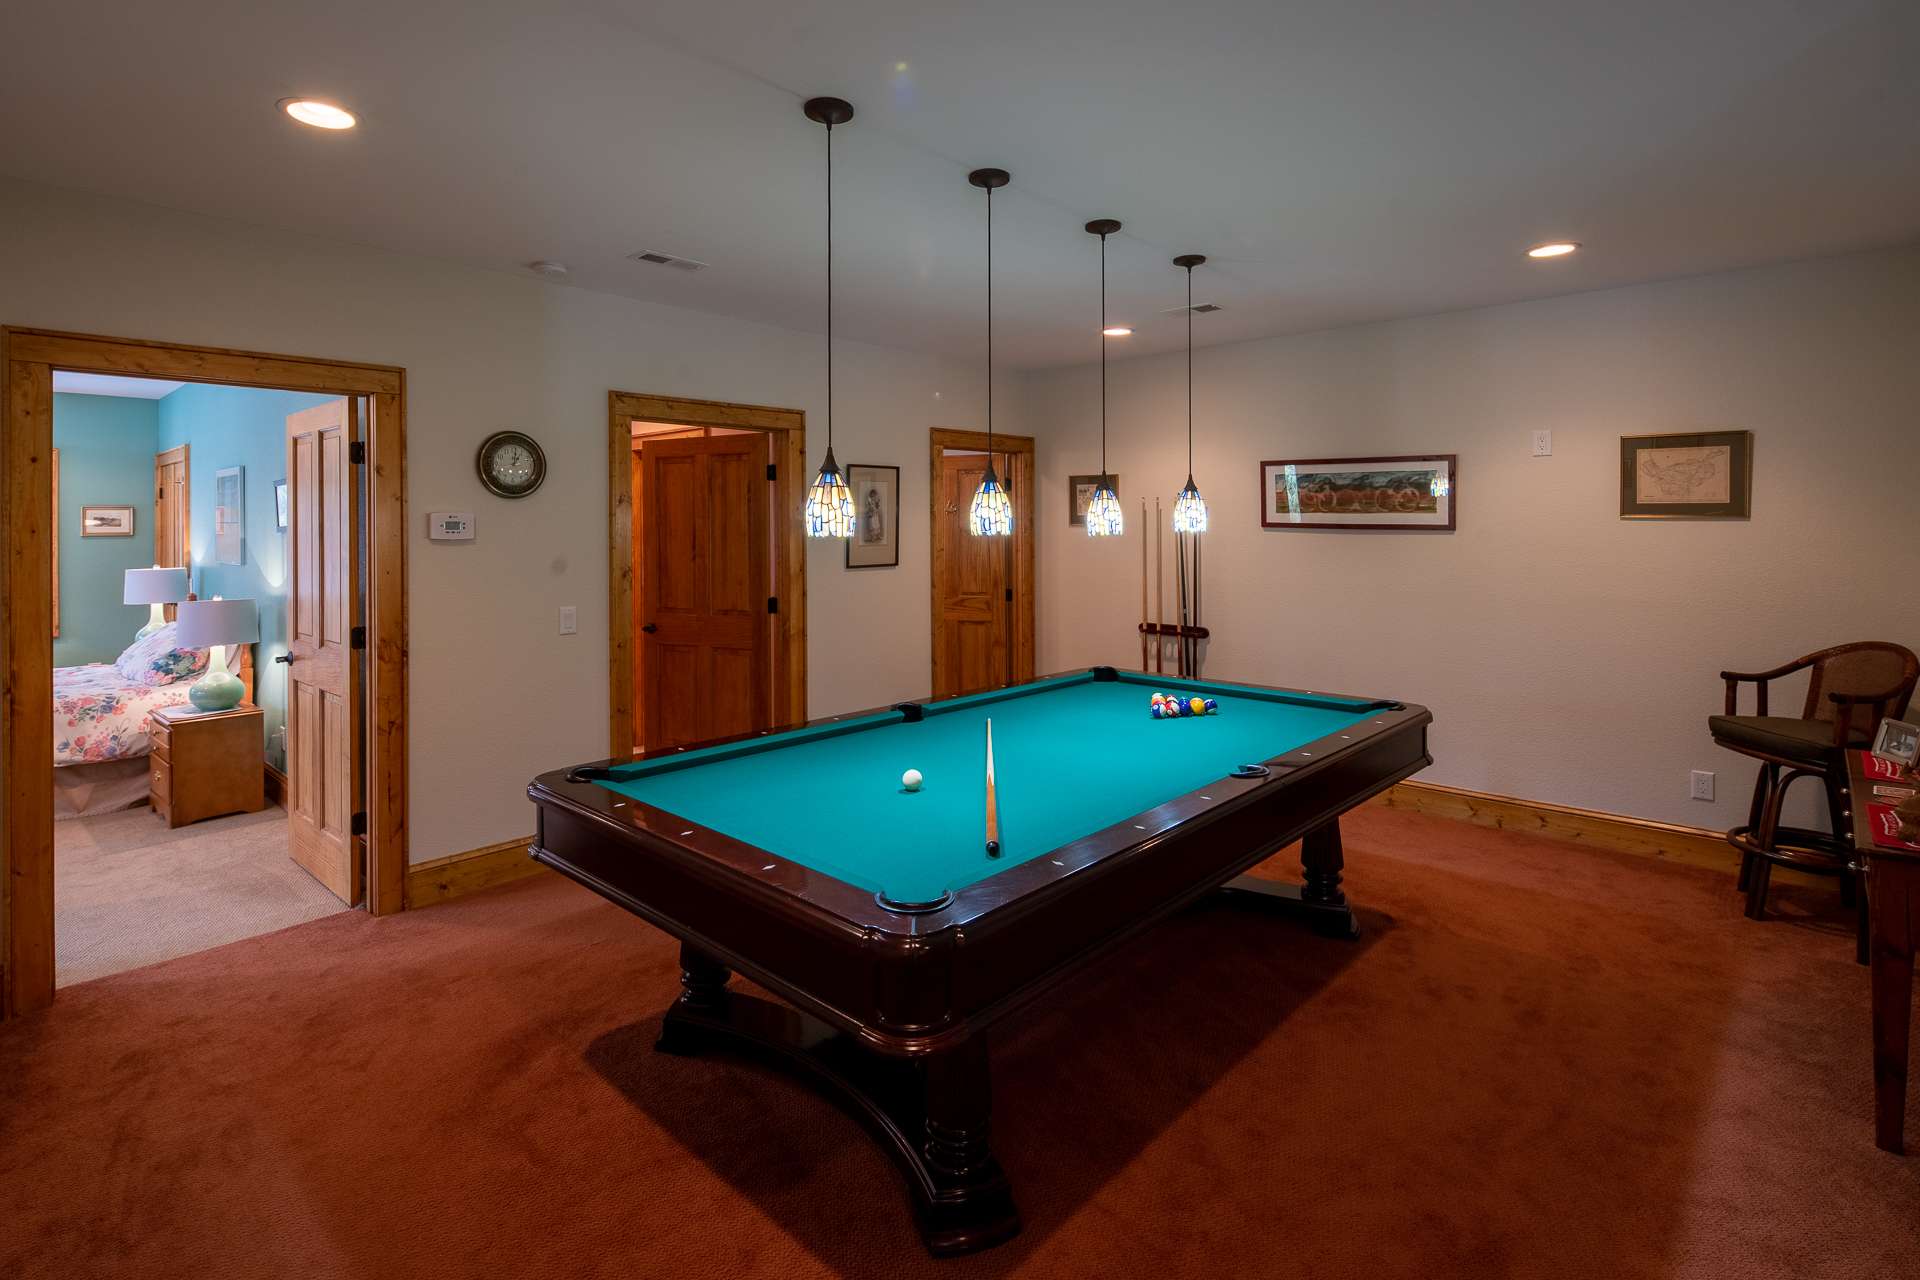 Plenty of space for a billiard table or other games.